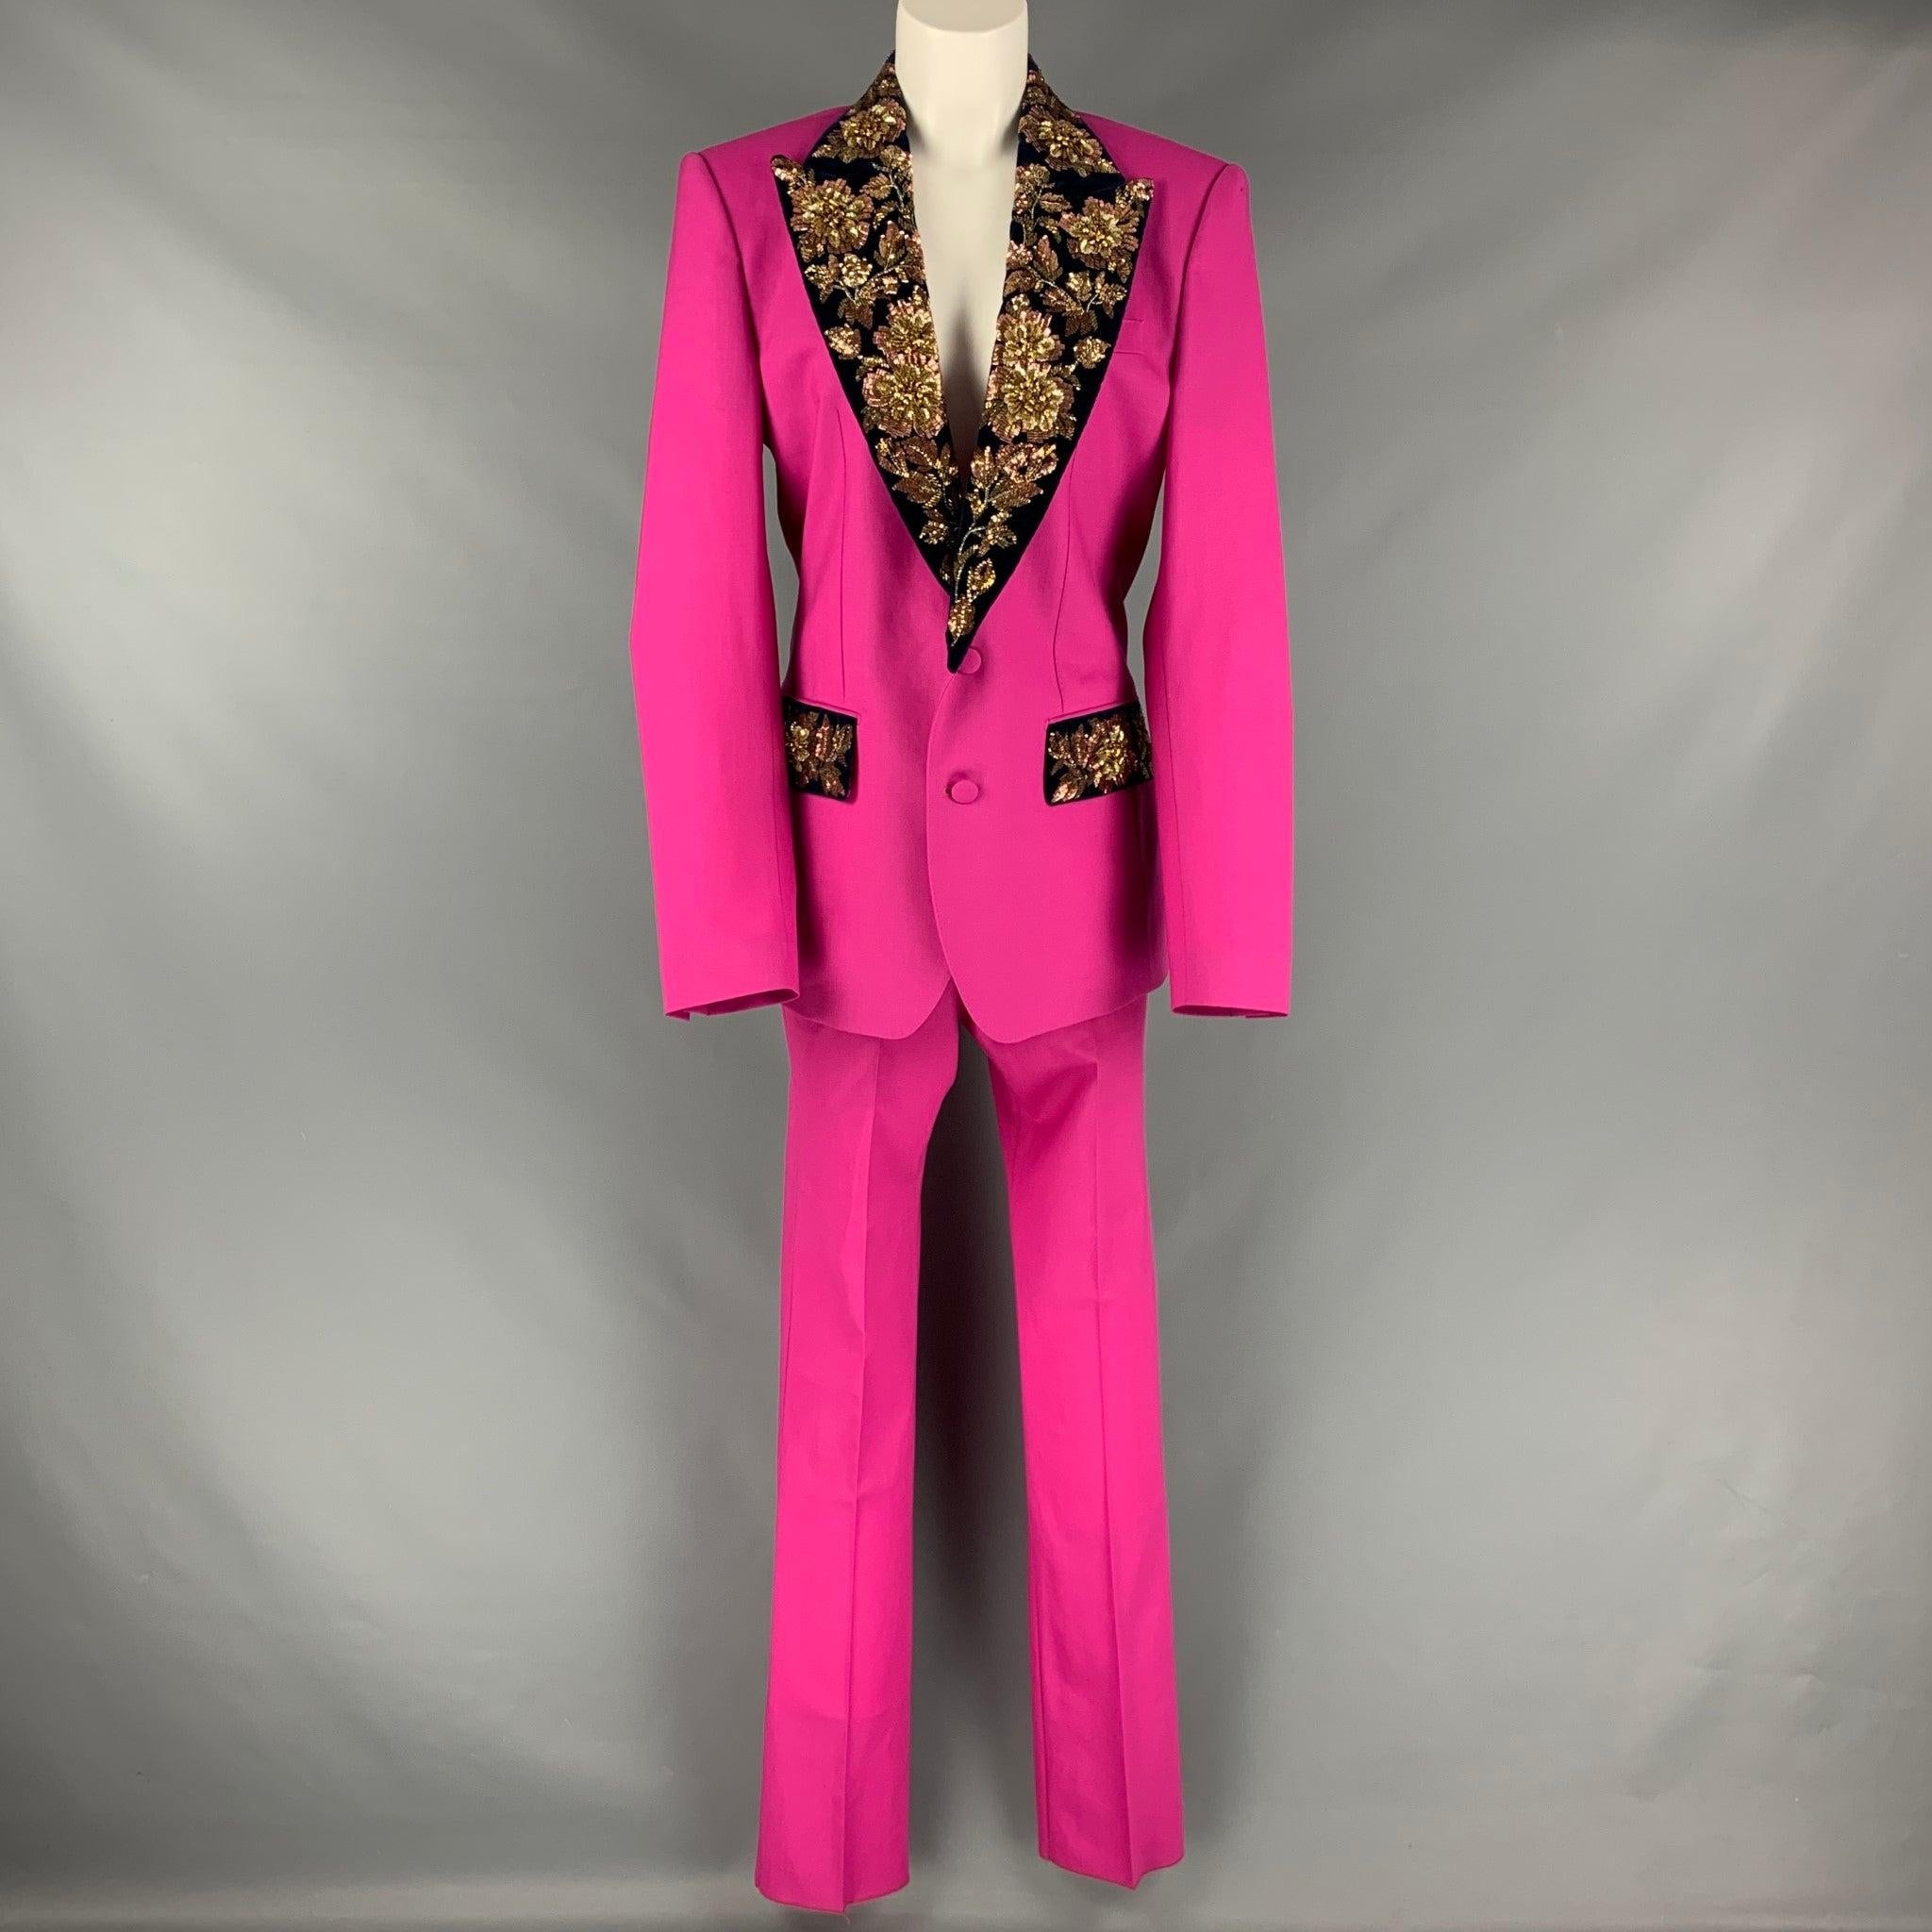 DOLCE & GABBANA pants set comes in a pink and navy wool woven material which includes a gold sequined embroidered, shoulder pads, peak lapel, buttoned closure jacket and matching flat front pants. Made in Italy.Very Good Pre- Owned Conditions.